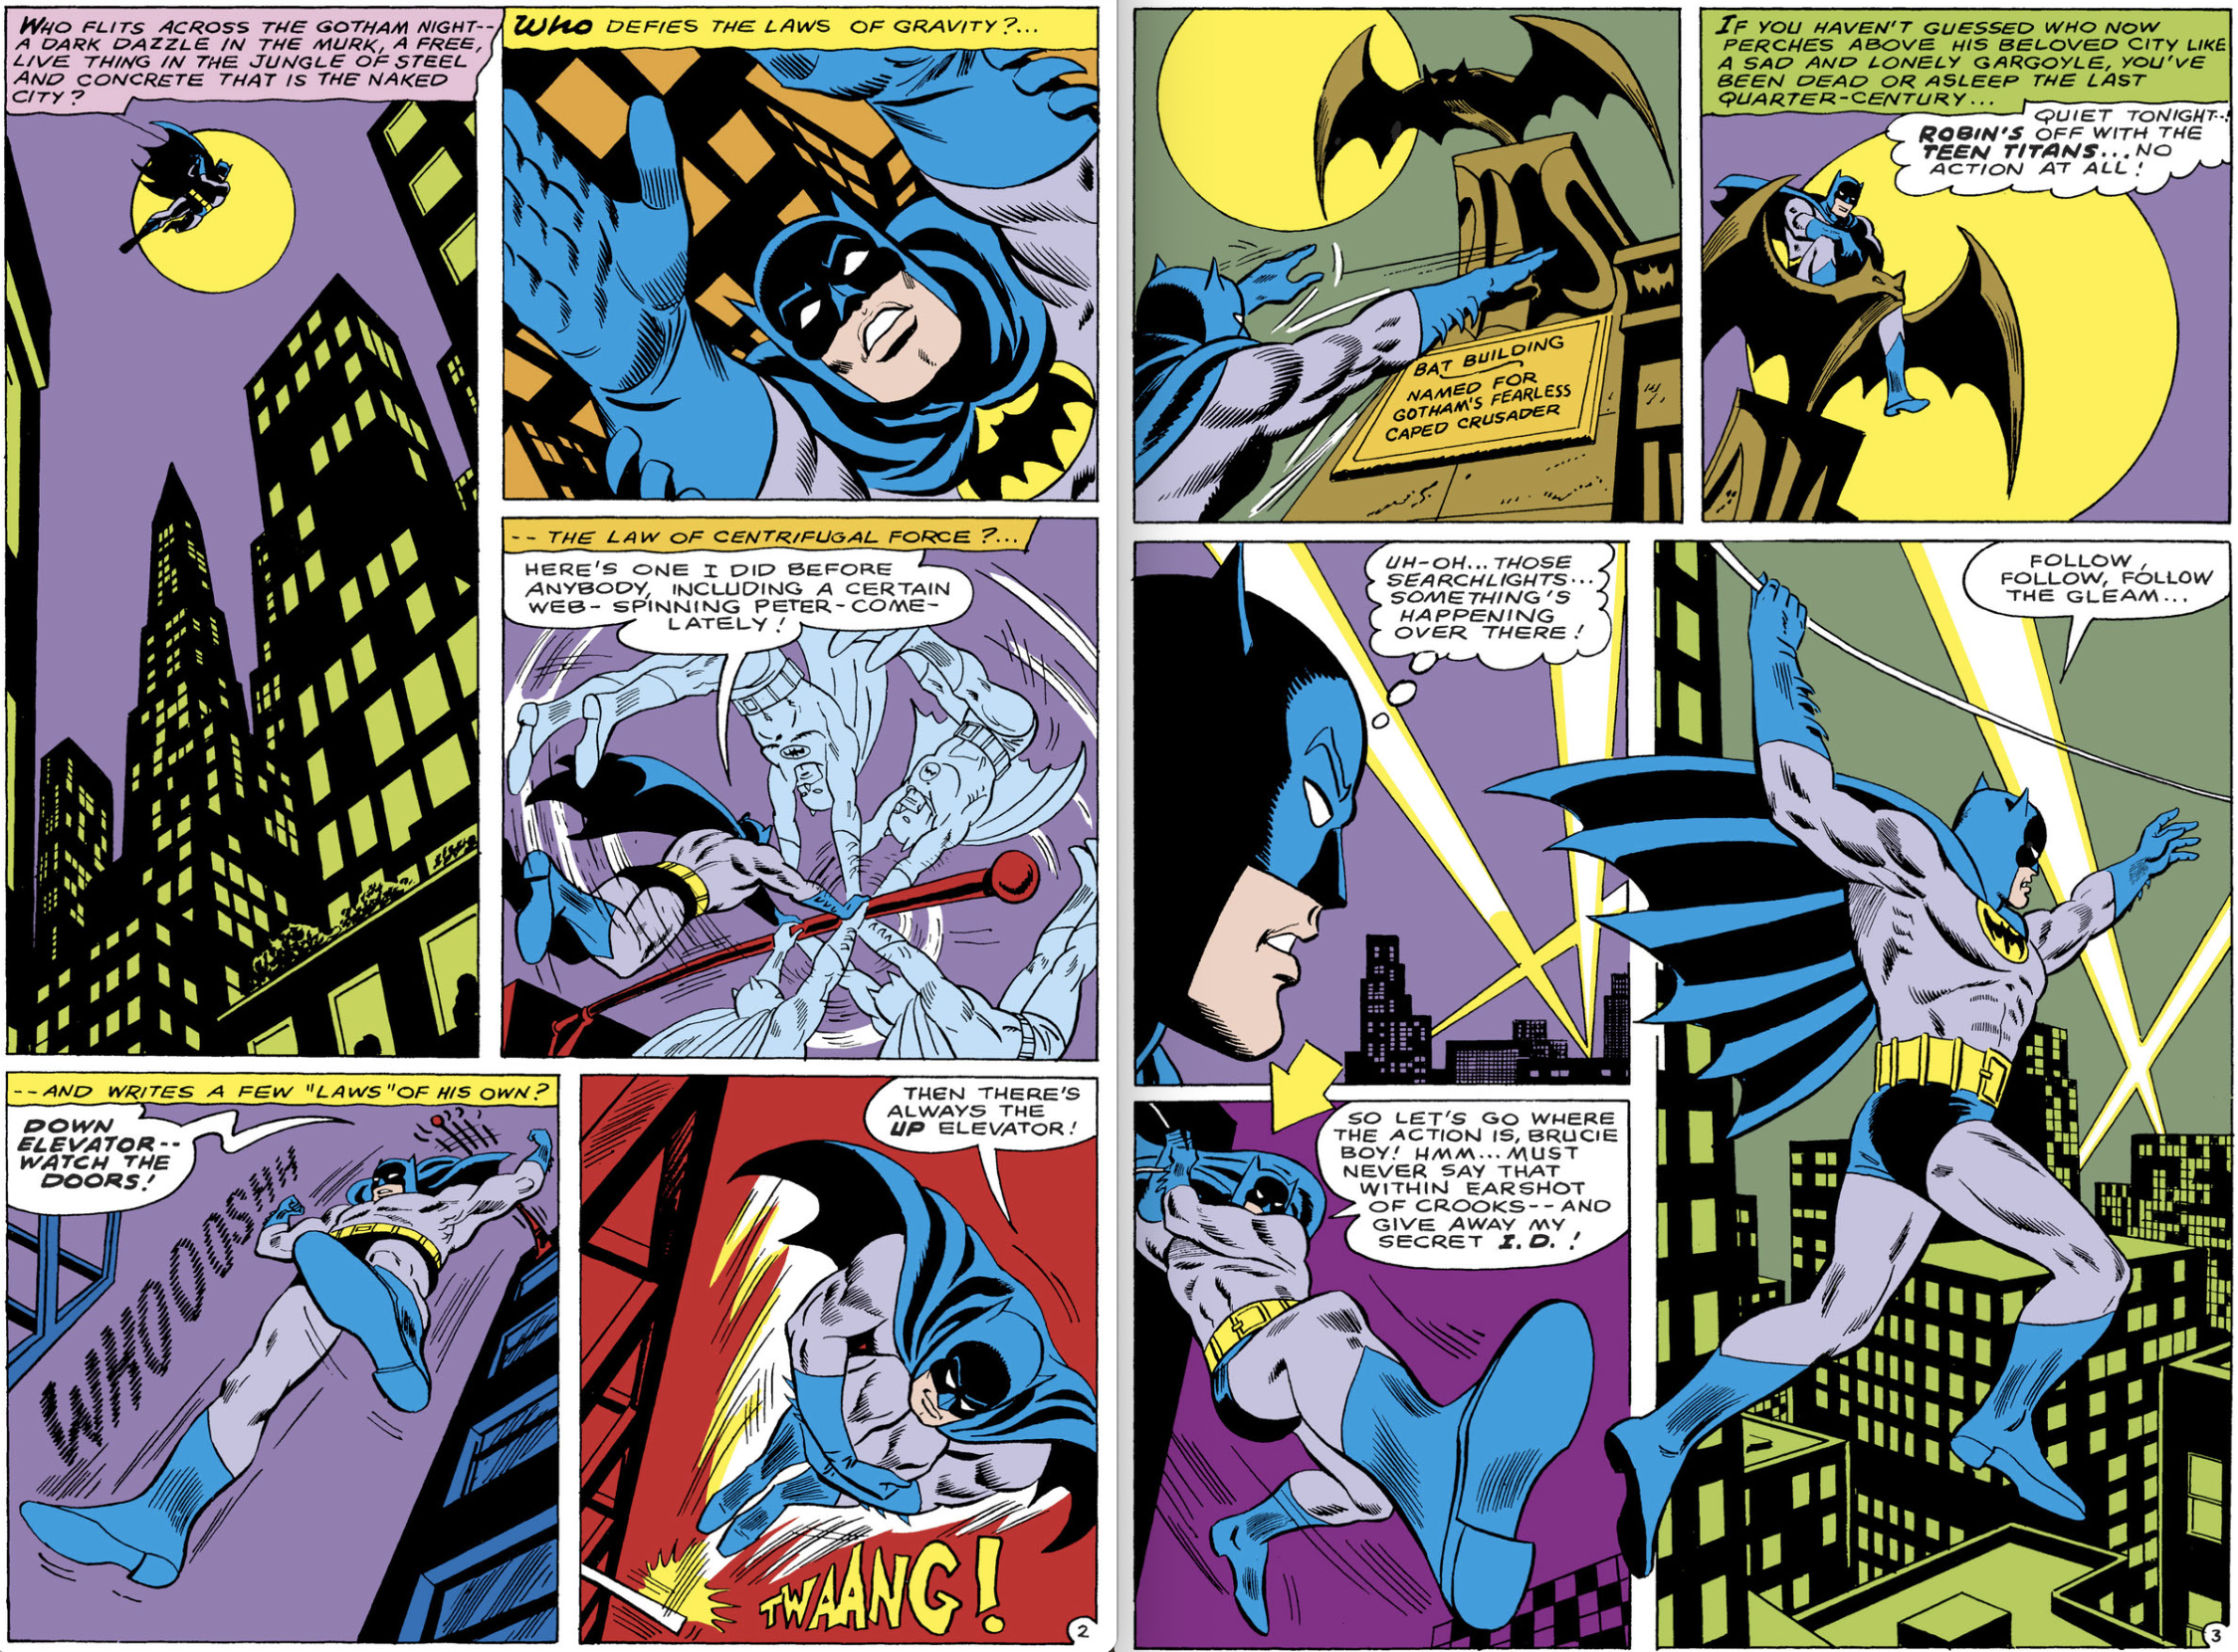 The Two-Page Spread That Proves ROSS ANDRU Should Have Drawn a Lot More BATMAN